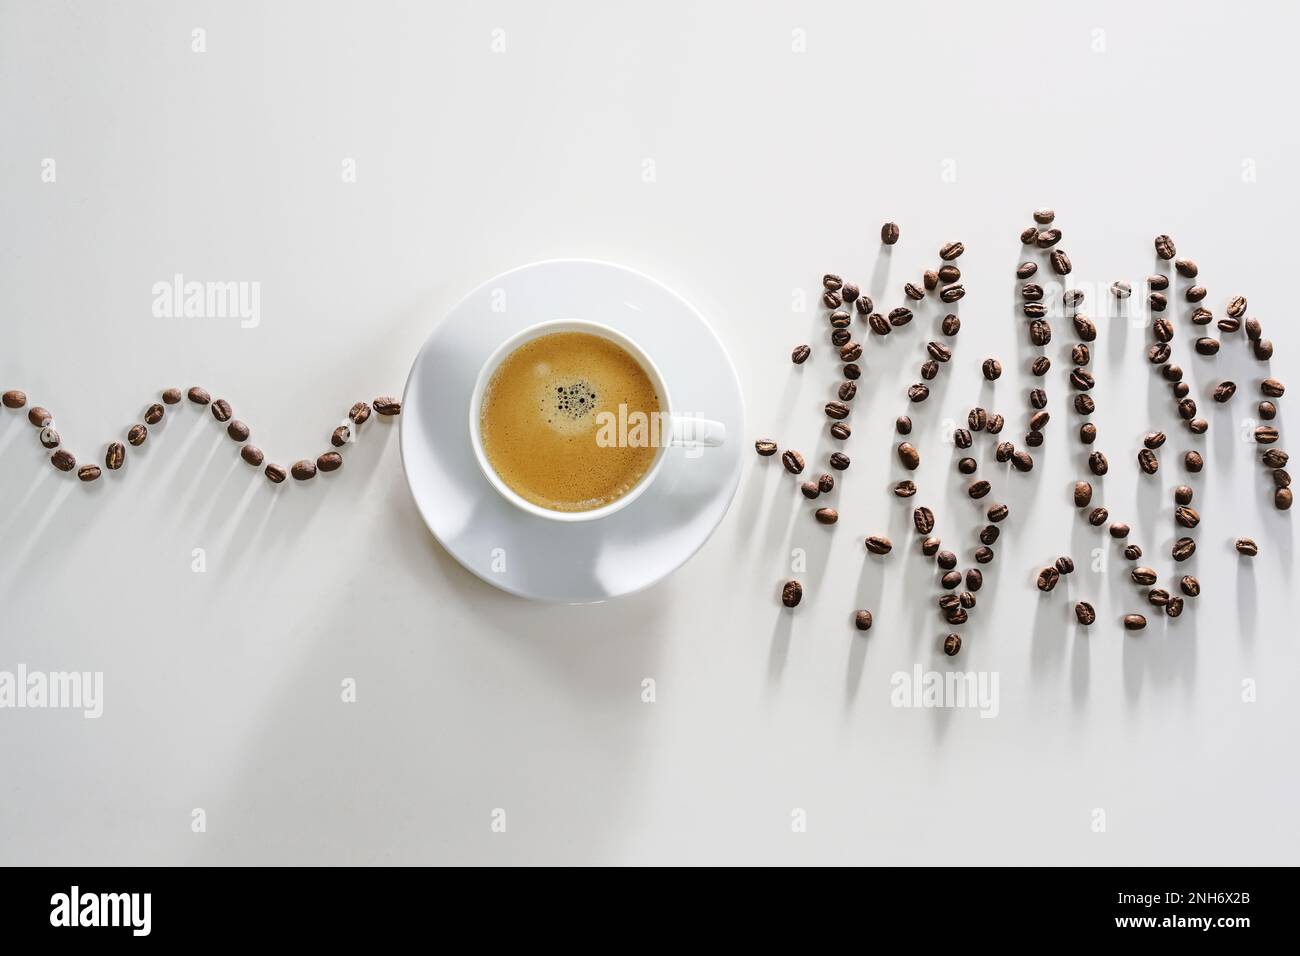 Coffee beans in a calm curve lead to a coffee cup, afterwards the beans show an exited messy pattern, concept for over stimulating effect on heart rhy Stock Photo